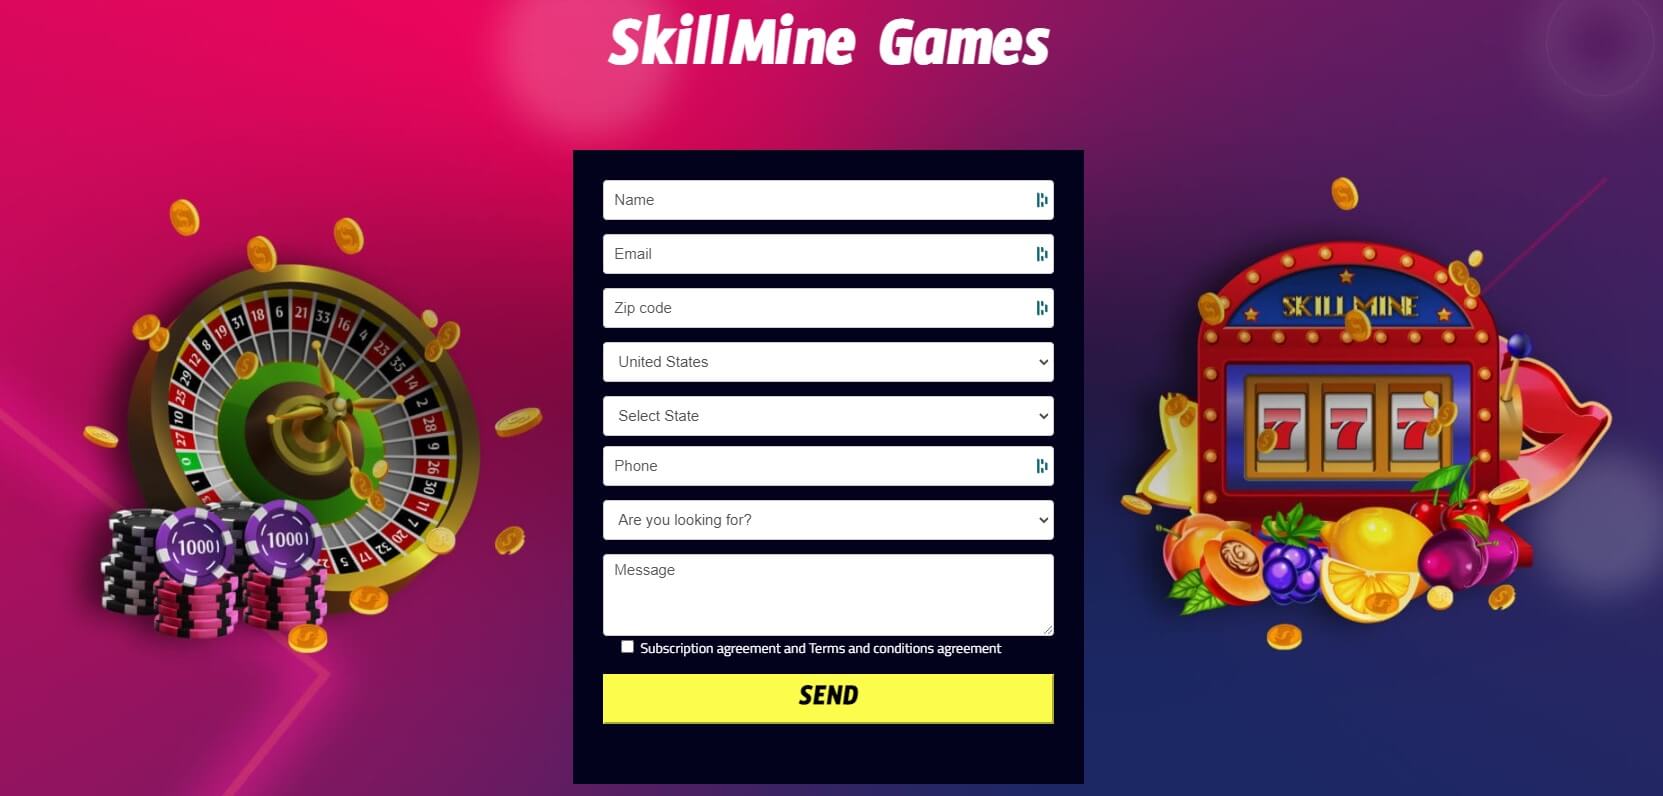 SkillMine.net Contact Page